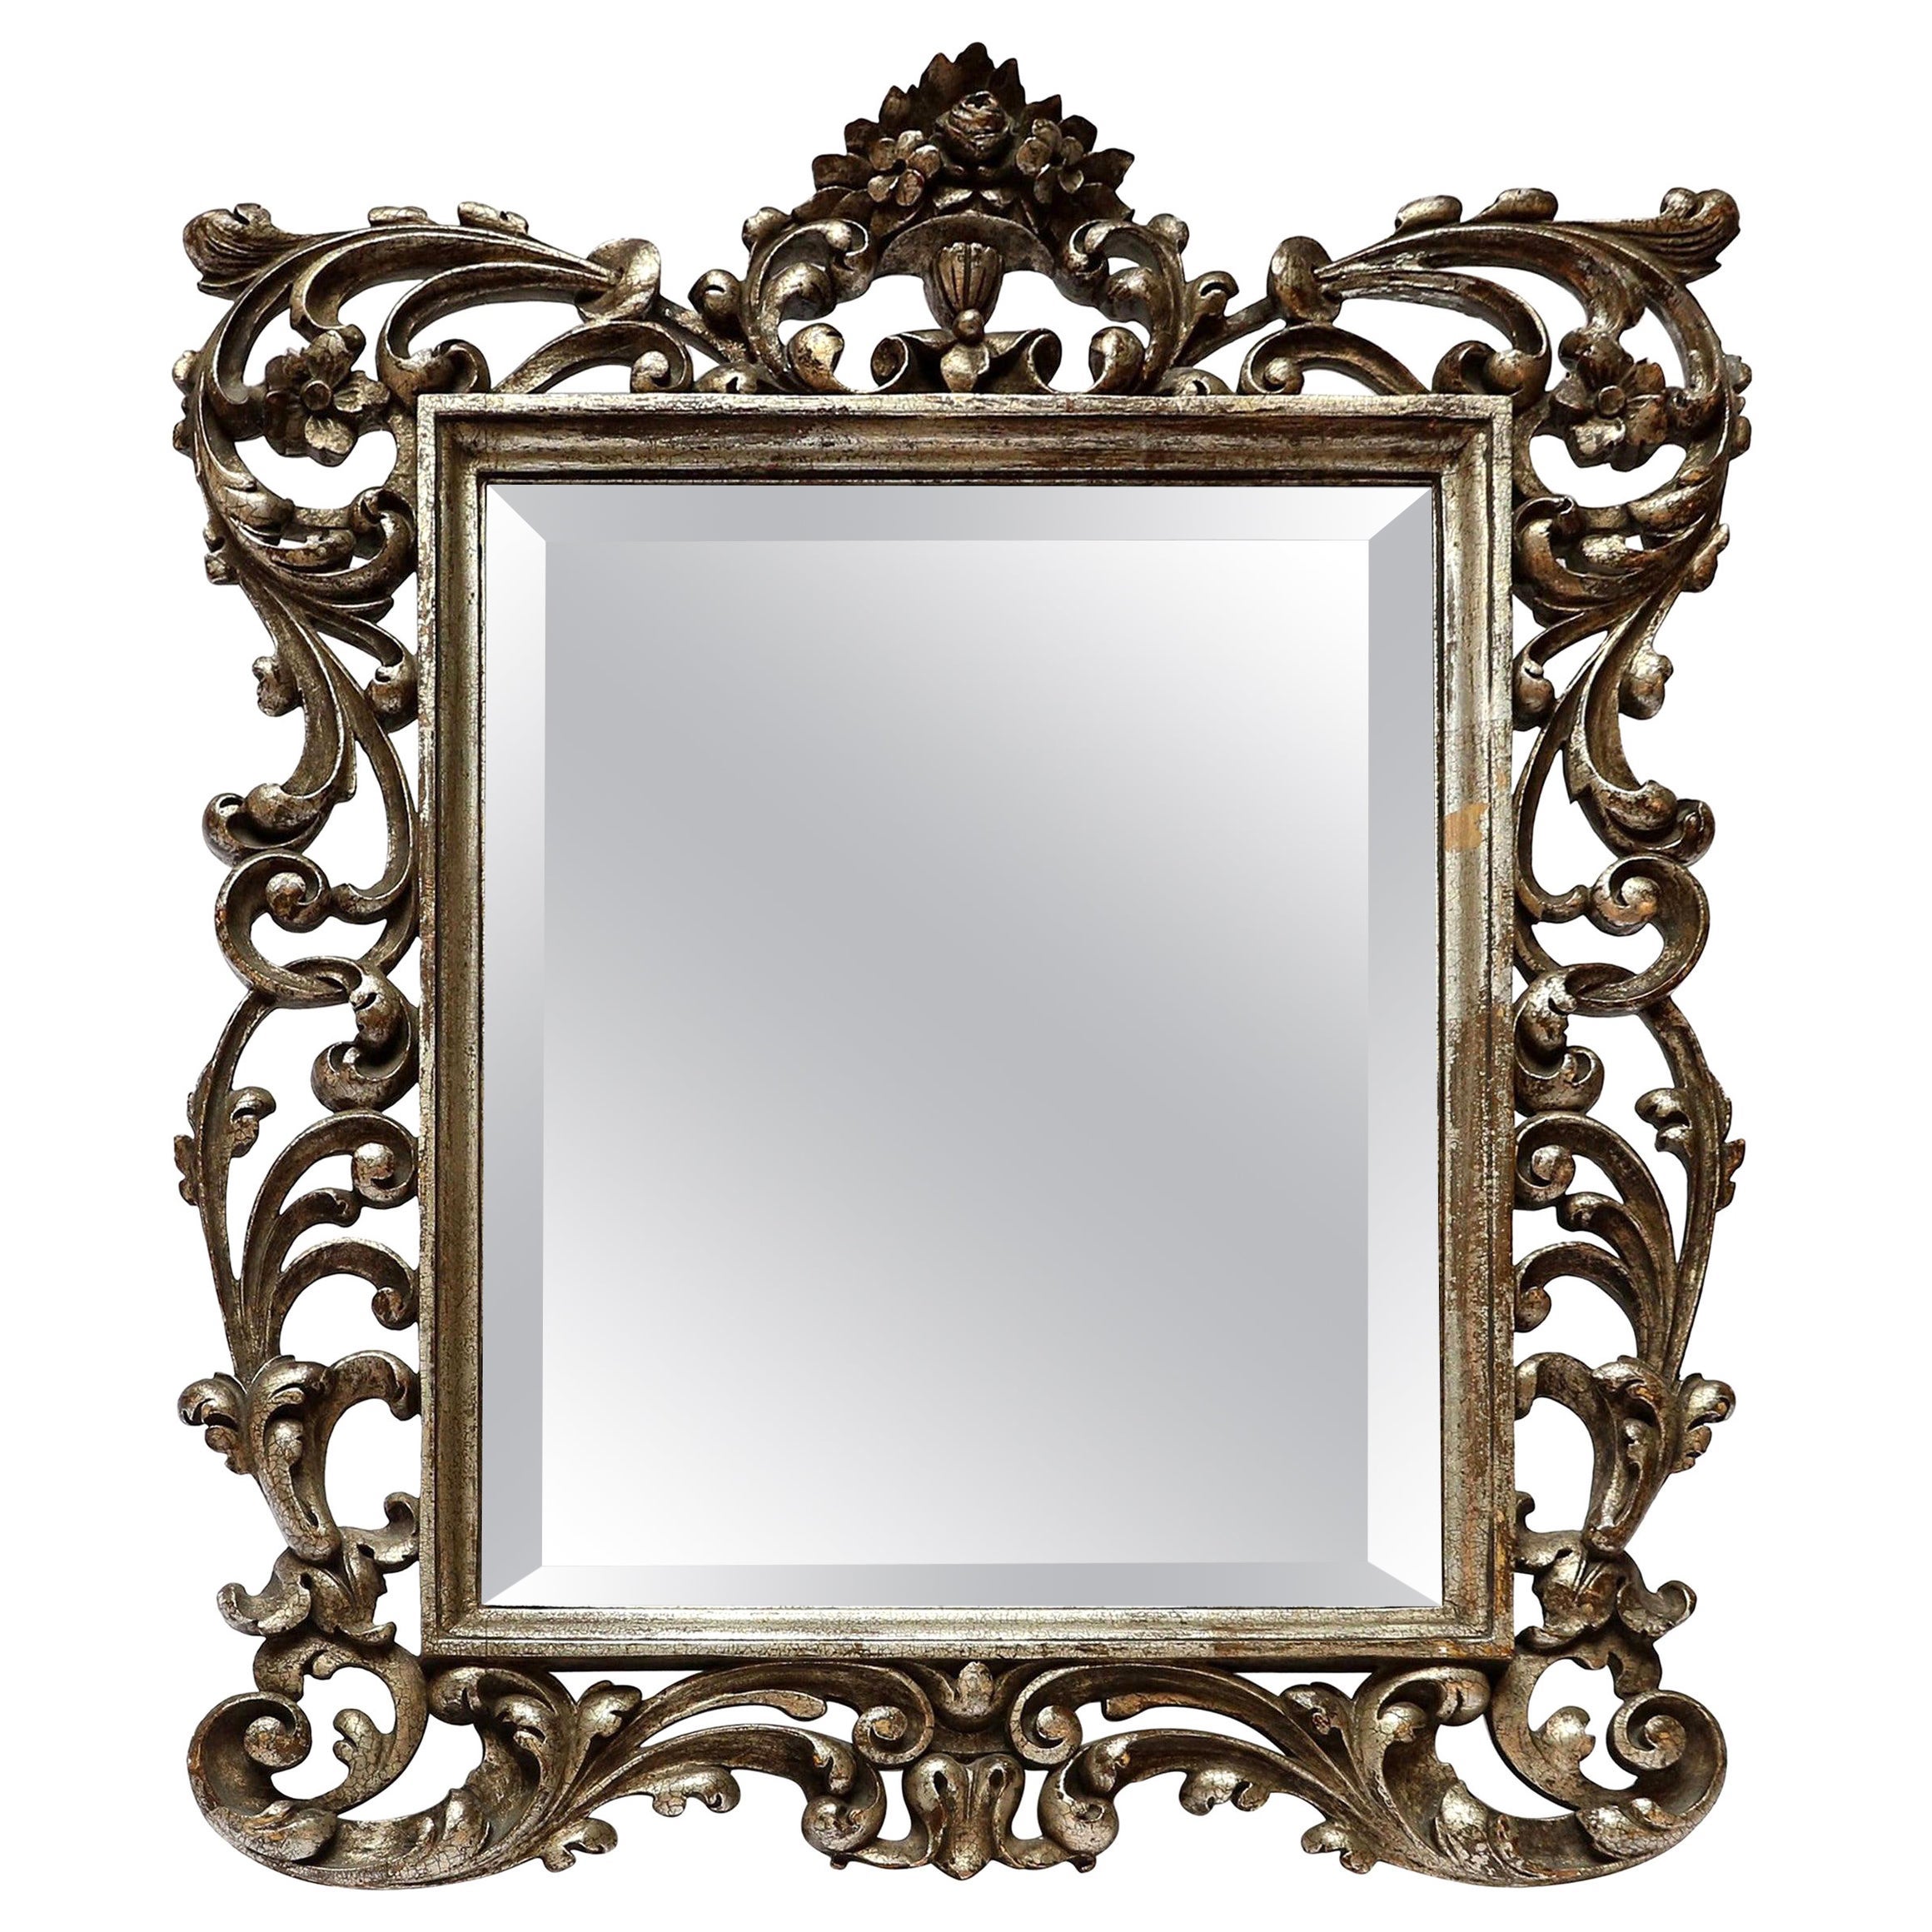 19th Century French Baroque Giltwood Vanity or Wall Mirror For Sale